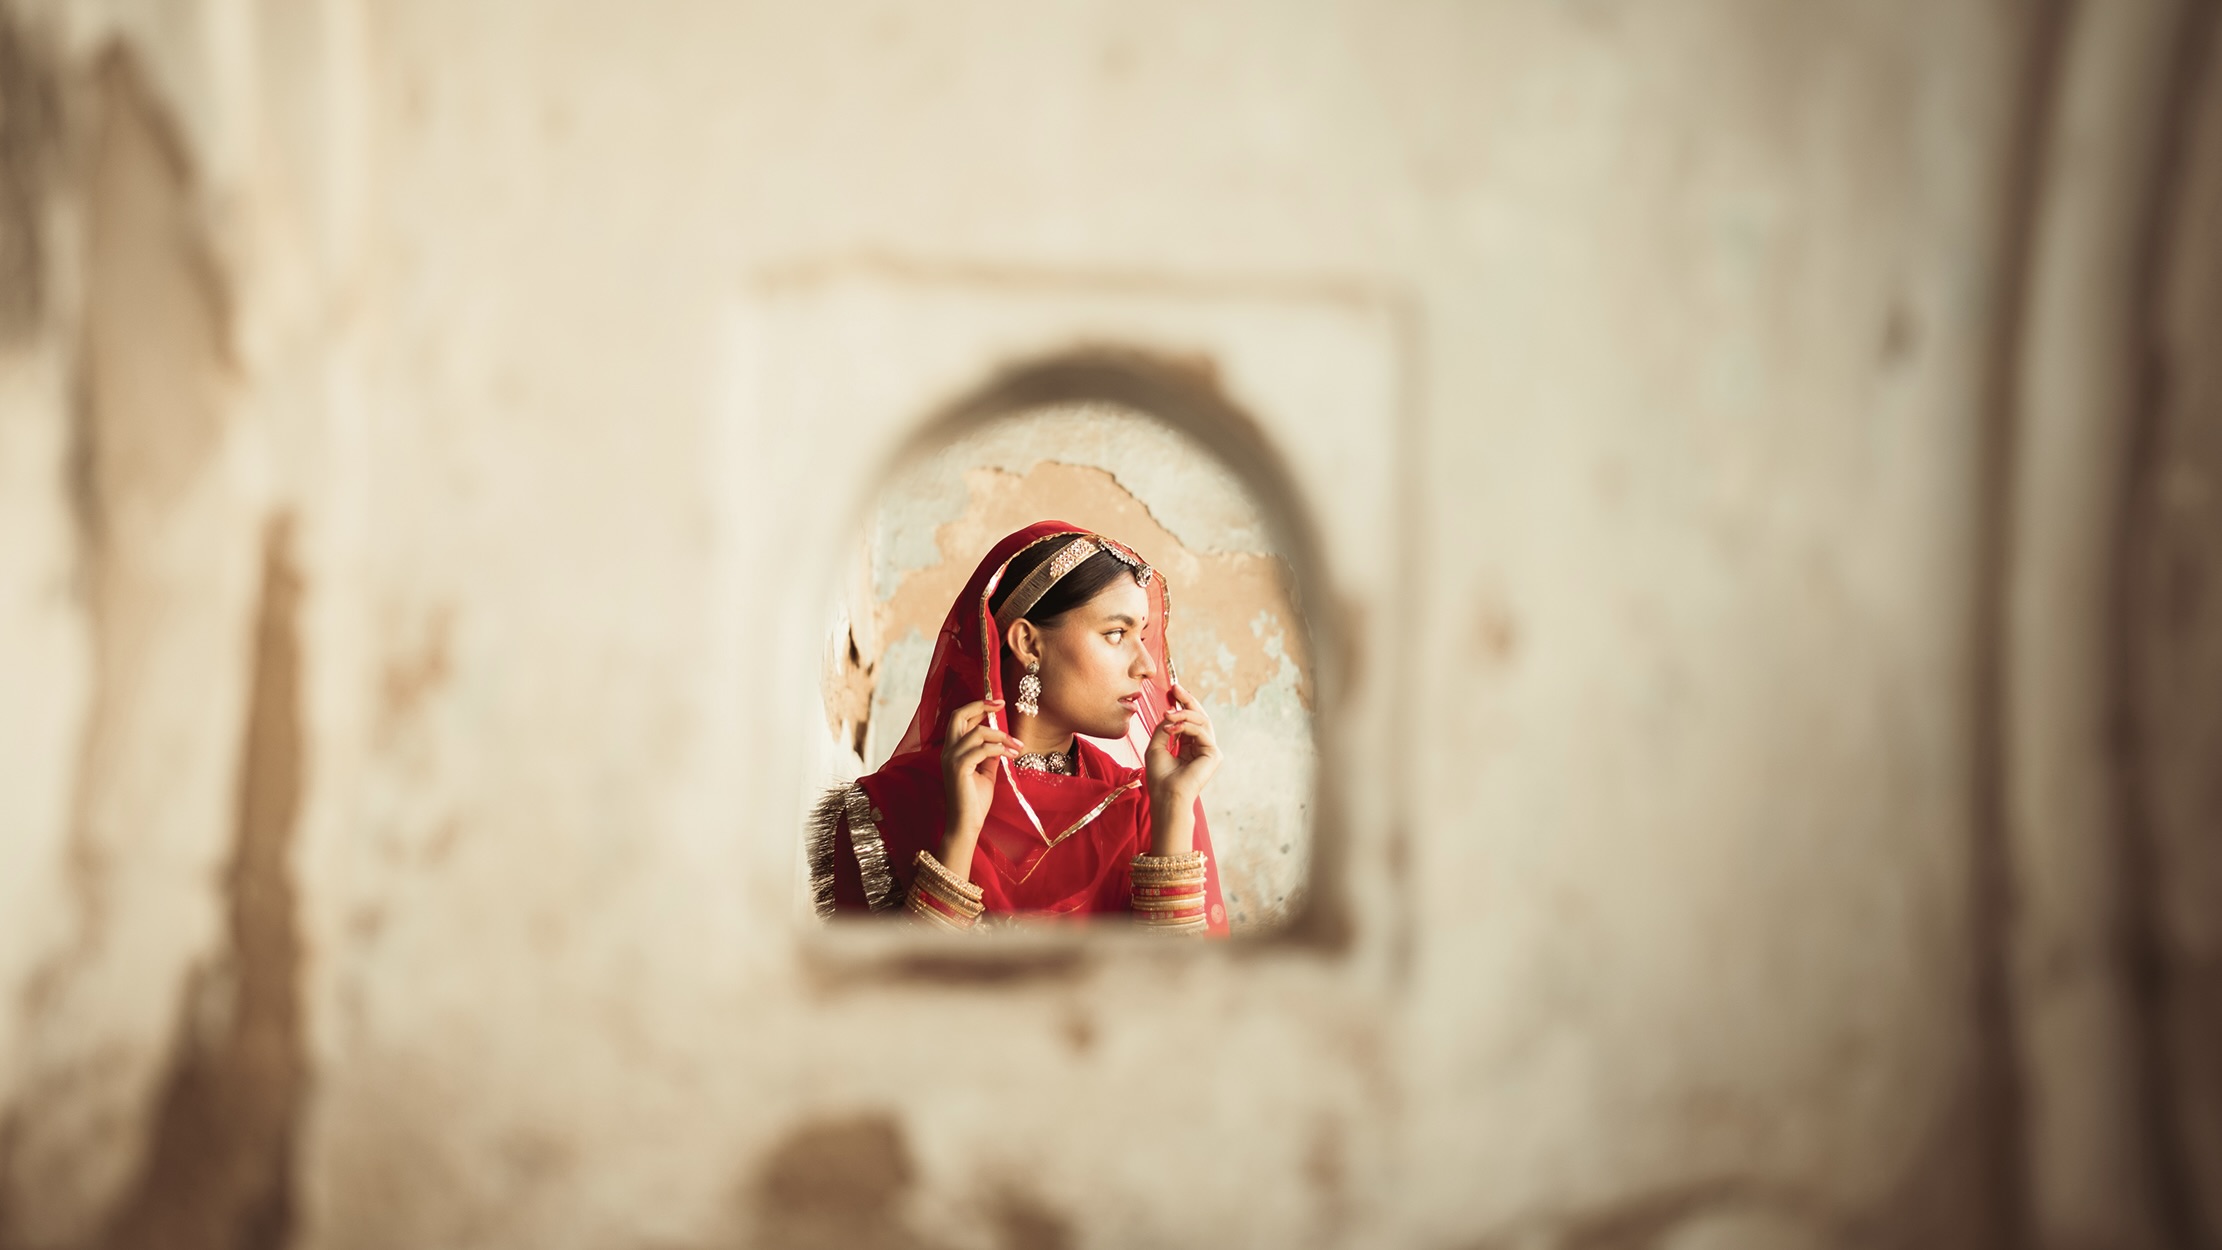 Capturing authenticity and culture with Licensing Contributor Ashvini Sihra